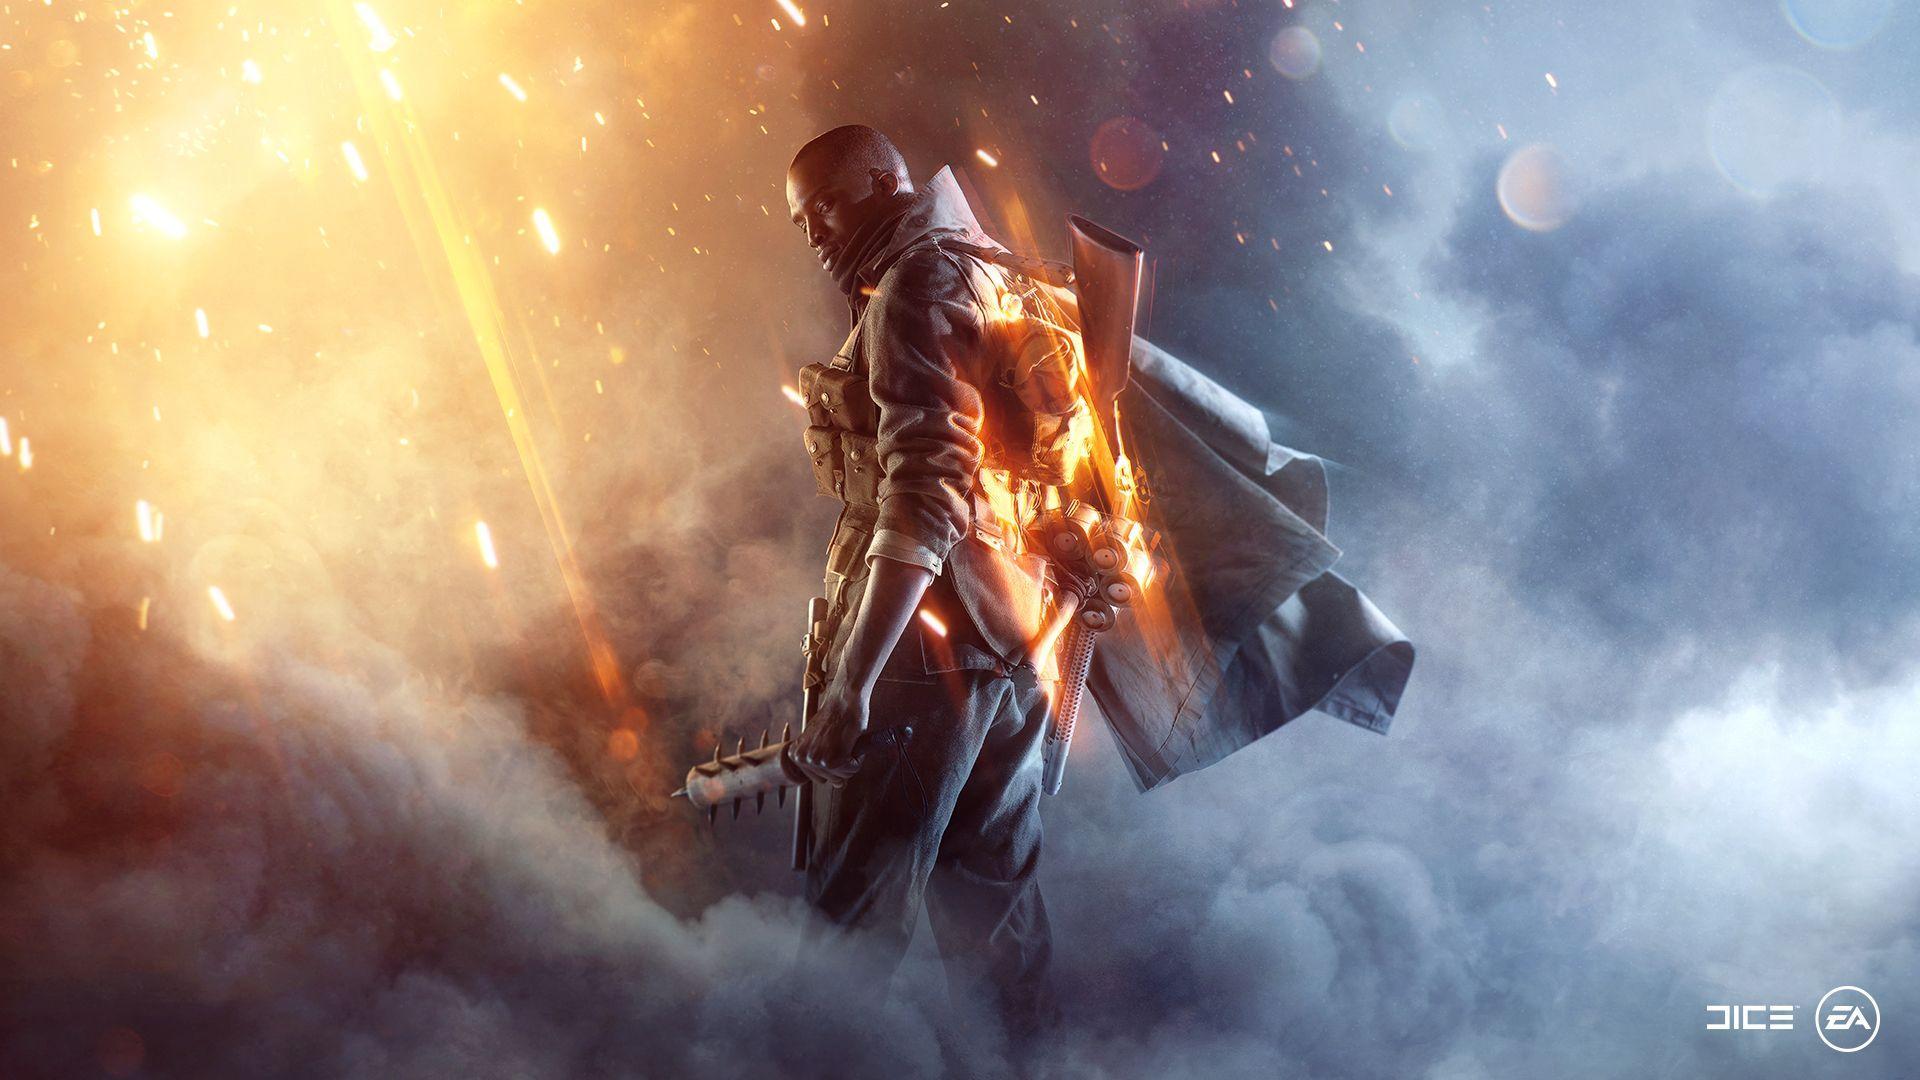 Battlefield 1 Wallpaper for PC, Mobile, and Tablets